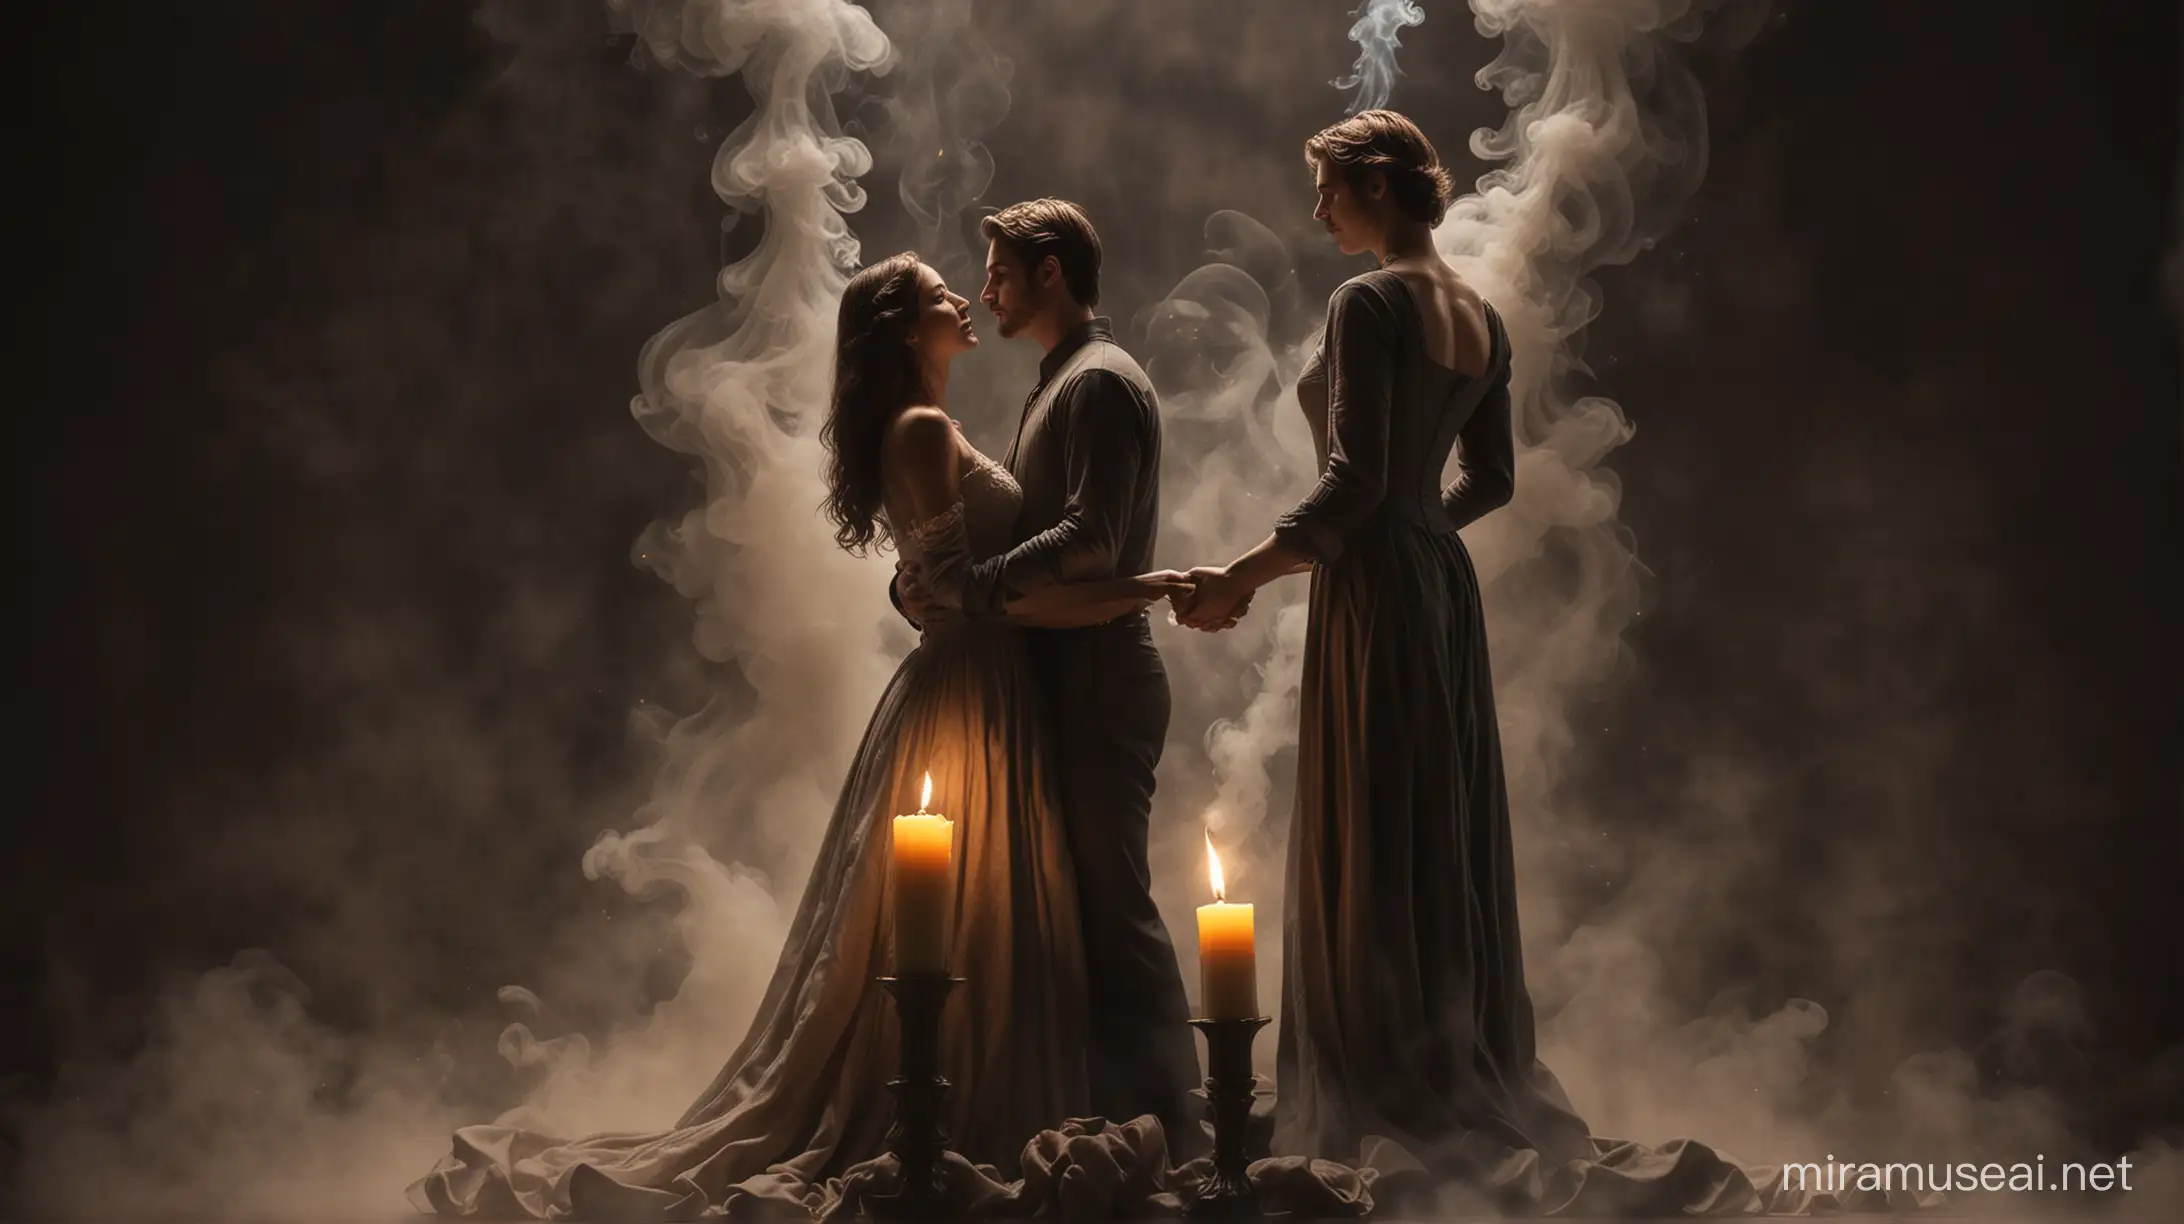 Romantic Couple Emerges from Candle Smoke in Realistic Representation